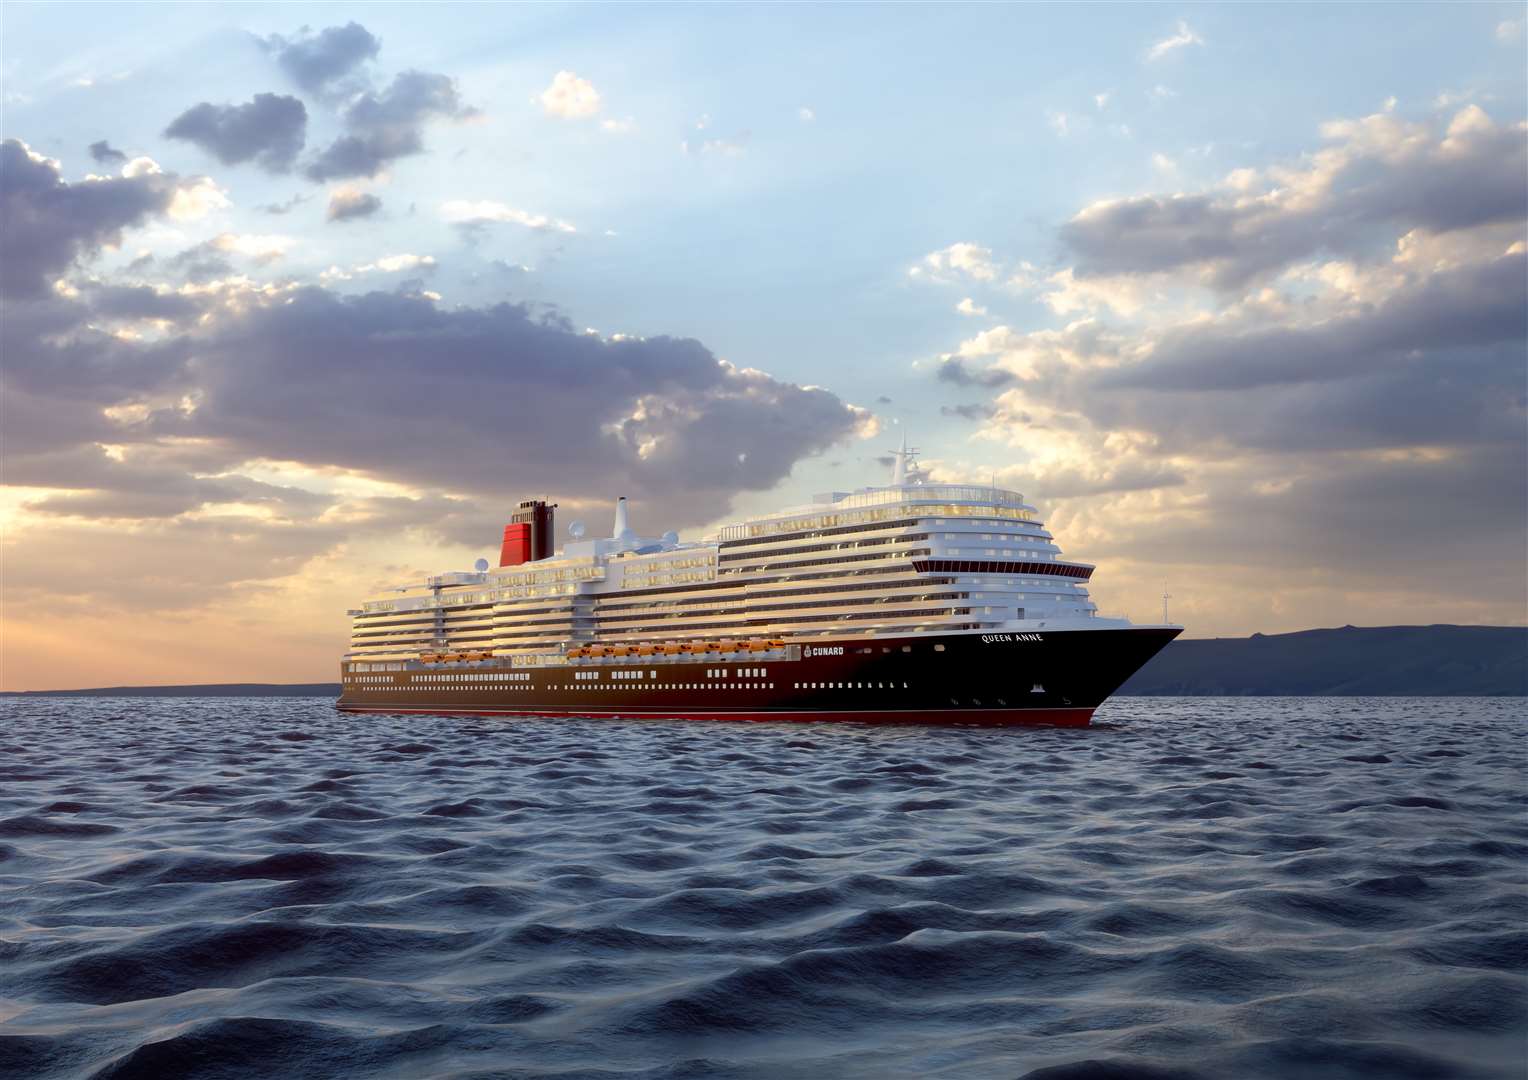 An artist’s impression of Cunard’s new cruise ship, the Queen Anne. Image: Cunard.